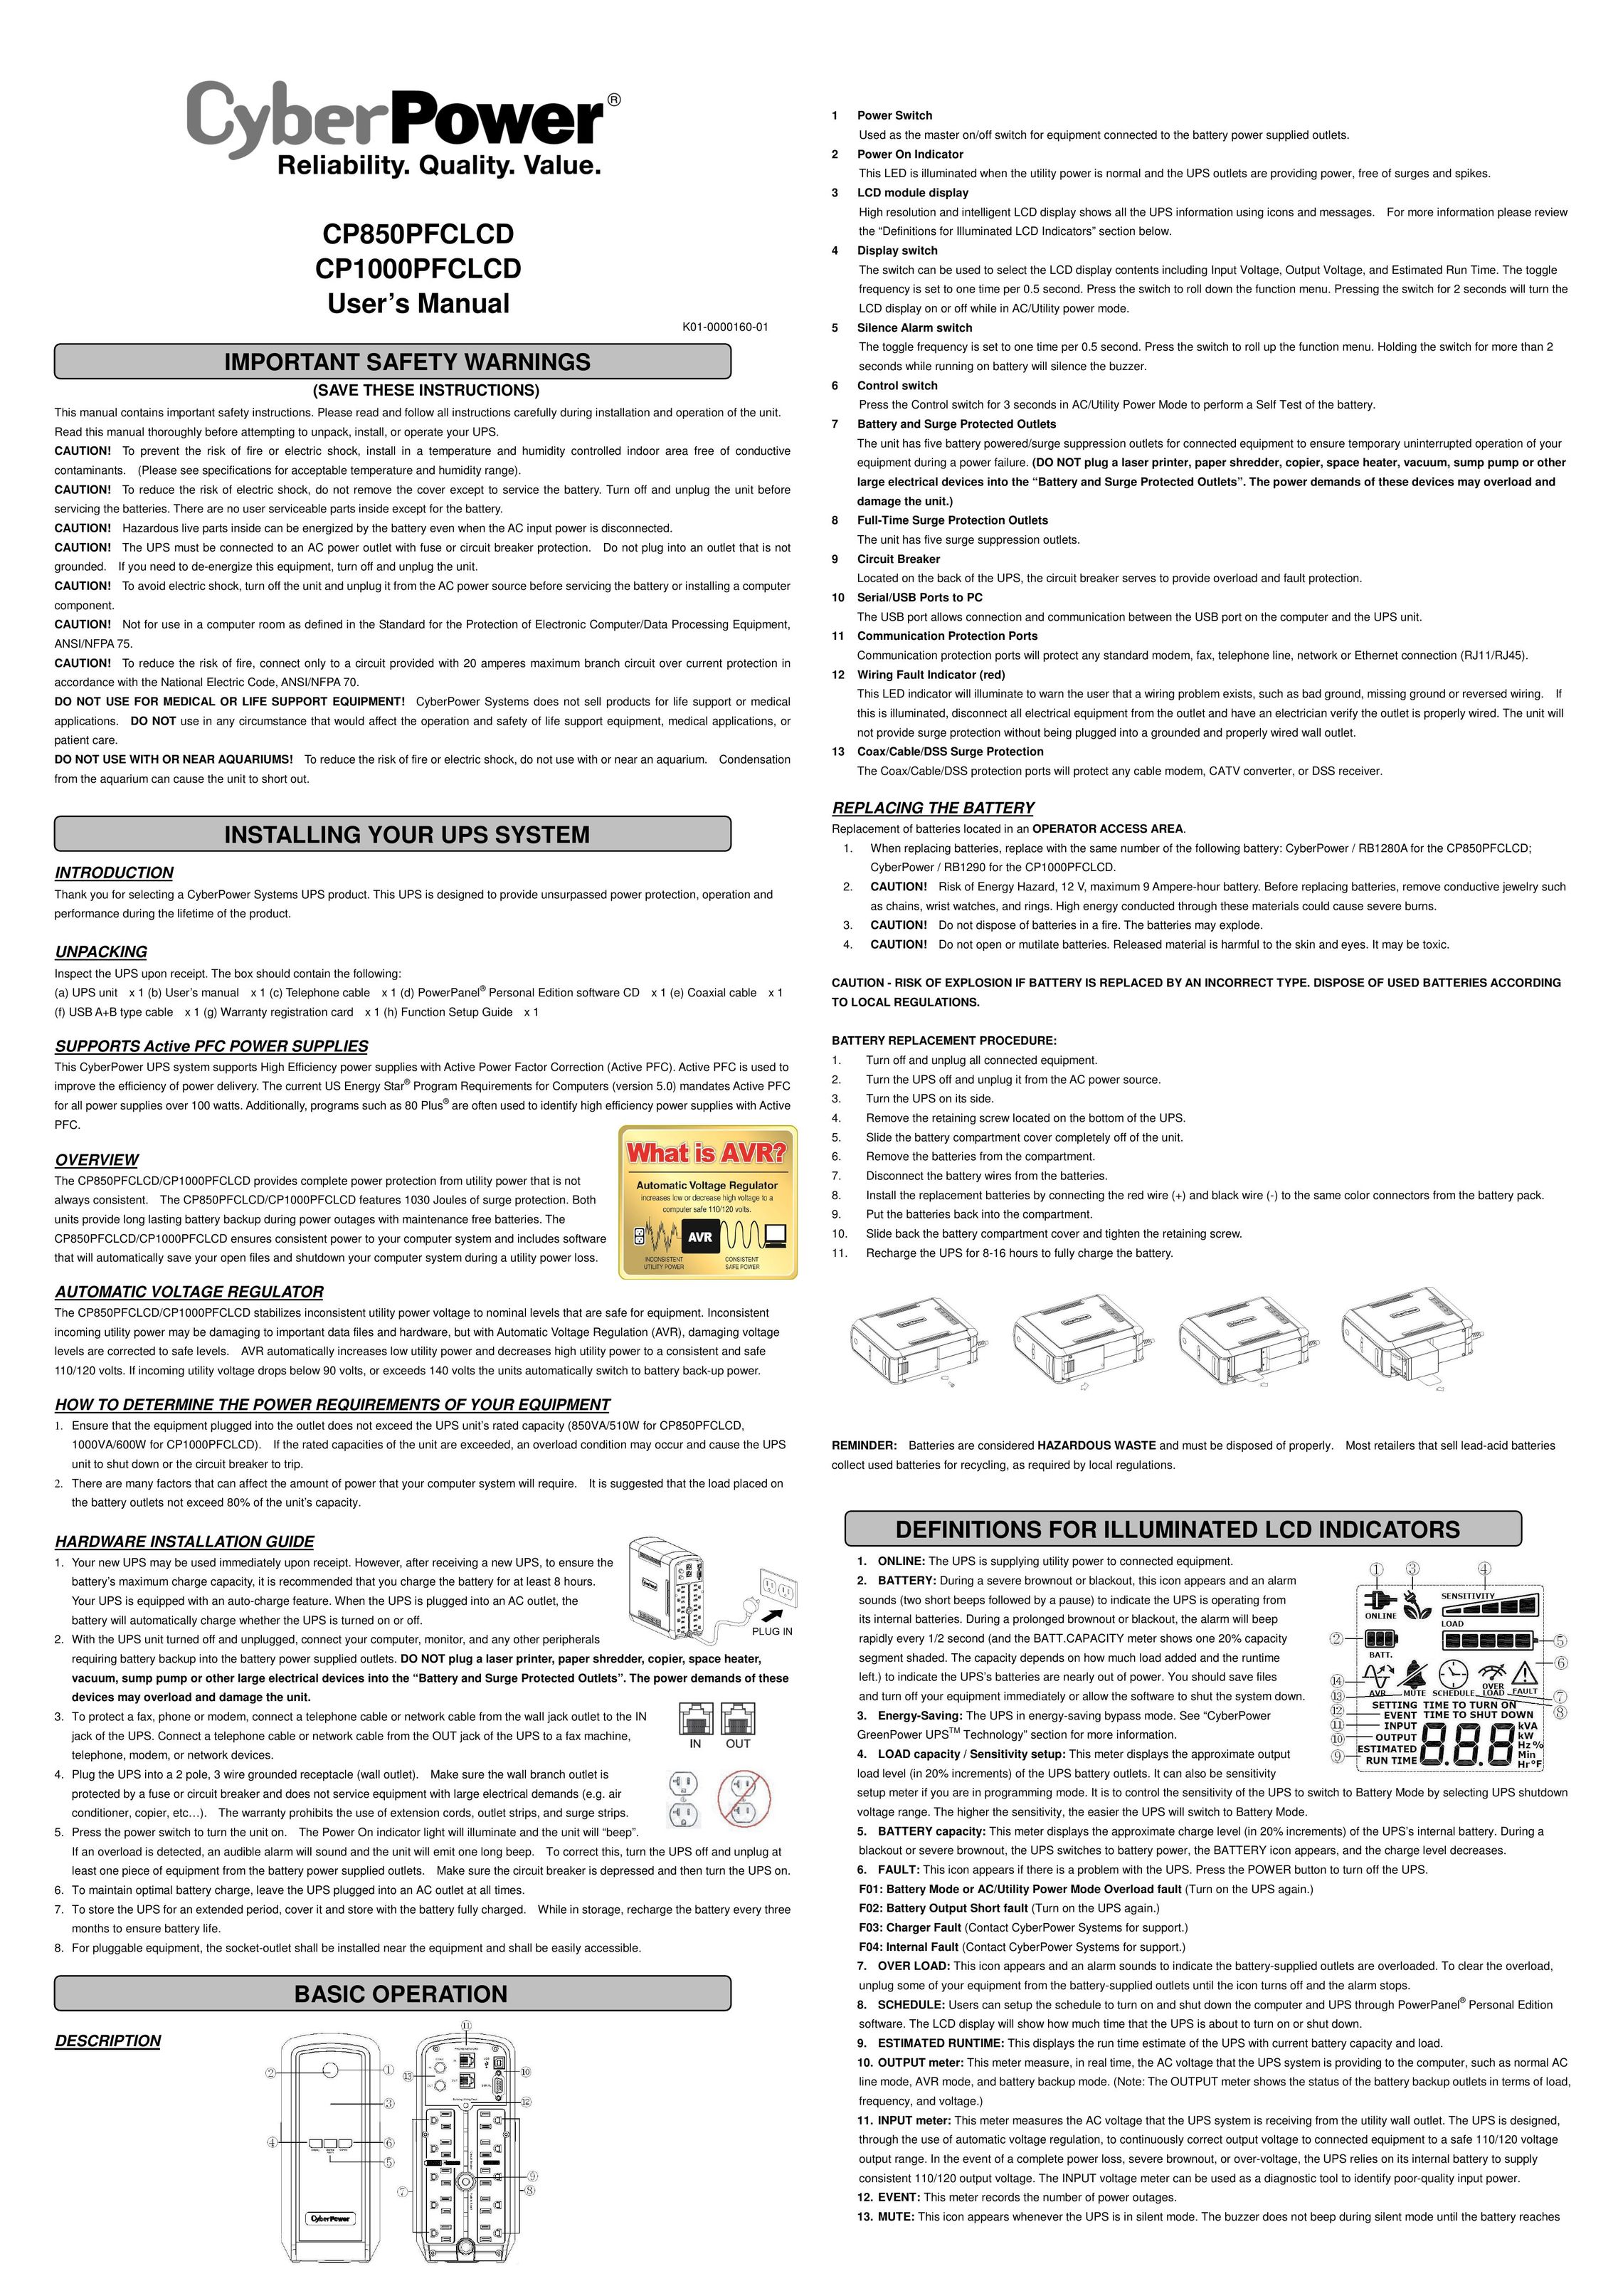 CyberPower CP100PFCLCD Power Supply User Manual